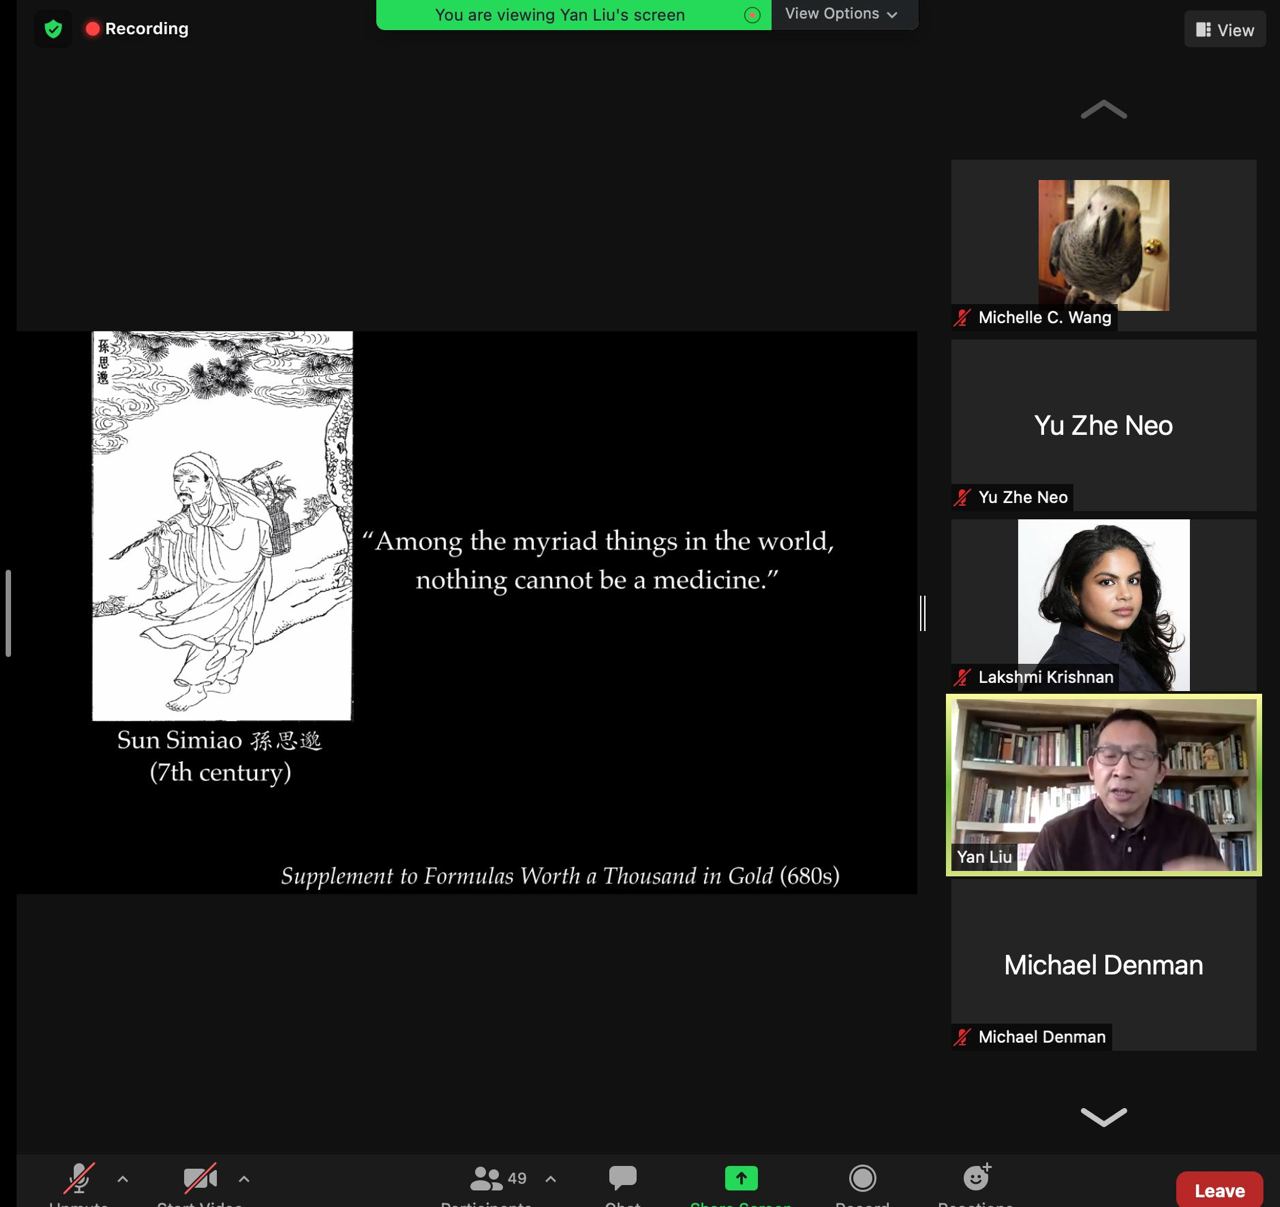 The "Healing with poisons" virtual event. Speaker Yan Liu is sharing his screen displaying an image of Sun Simiao (7th century), with the quote "Among the myriad things in the world, nothing cannot be a medicine". The other panelists are Michelle C. Wang, Lakshmi Krishnan and Michael Denman